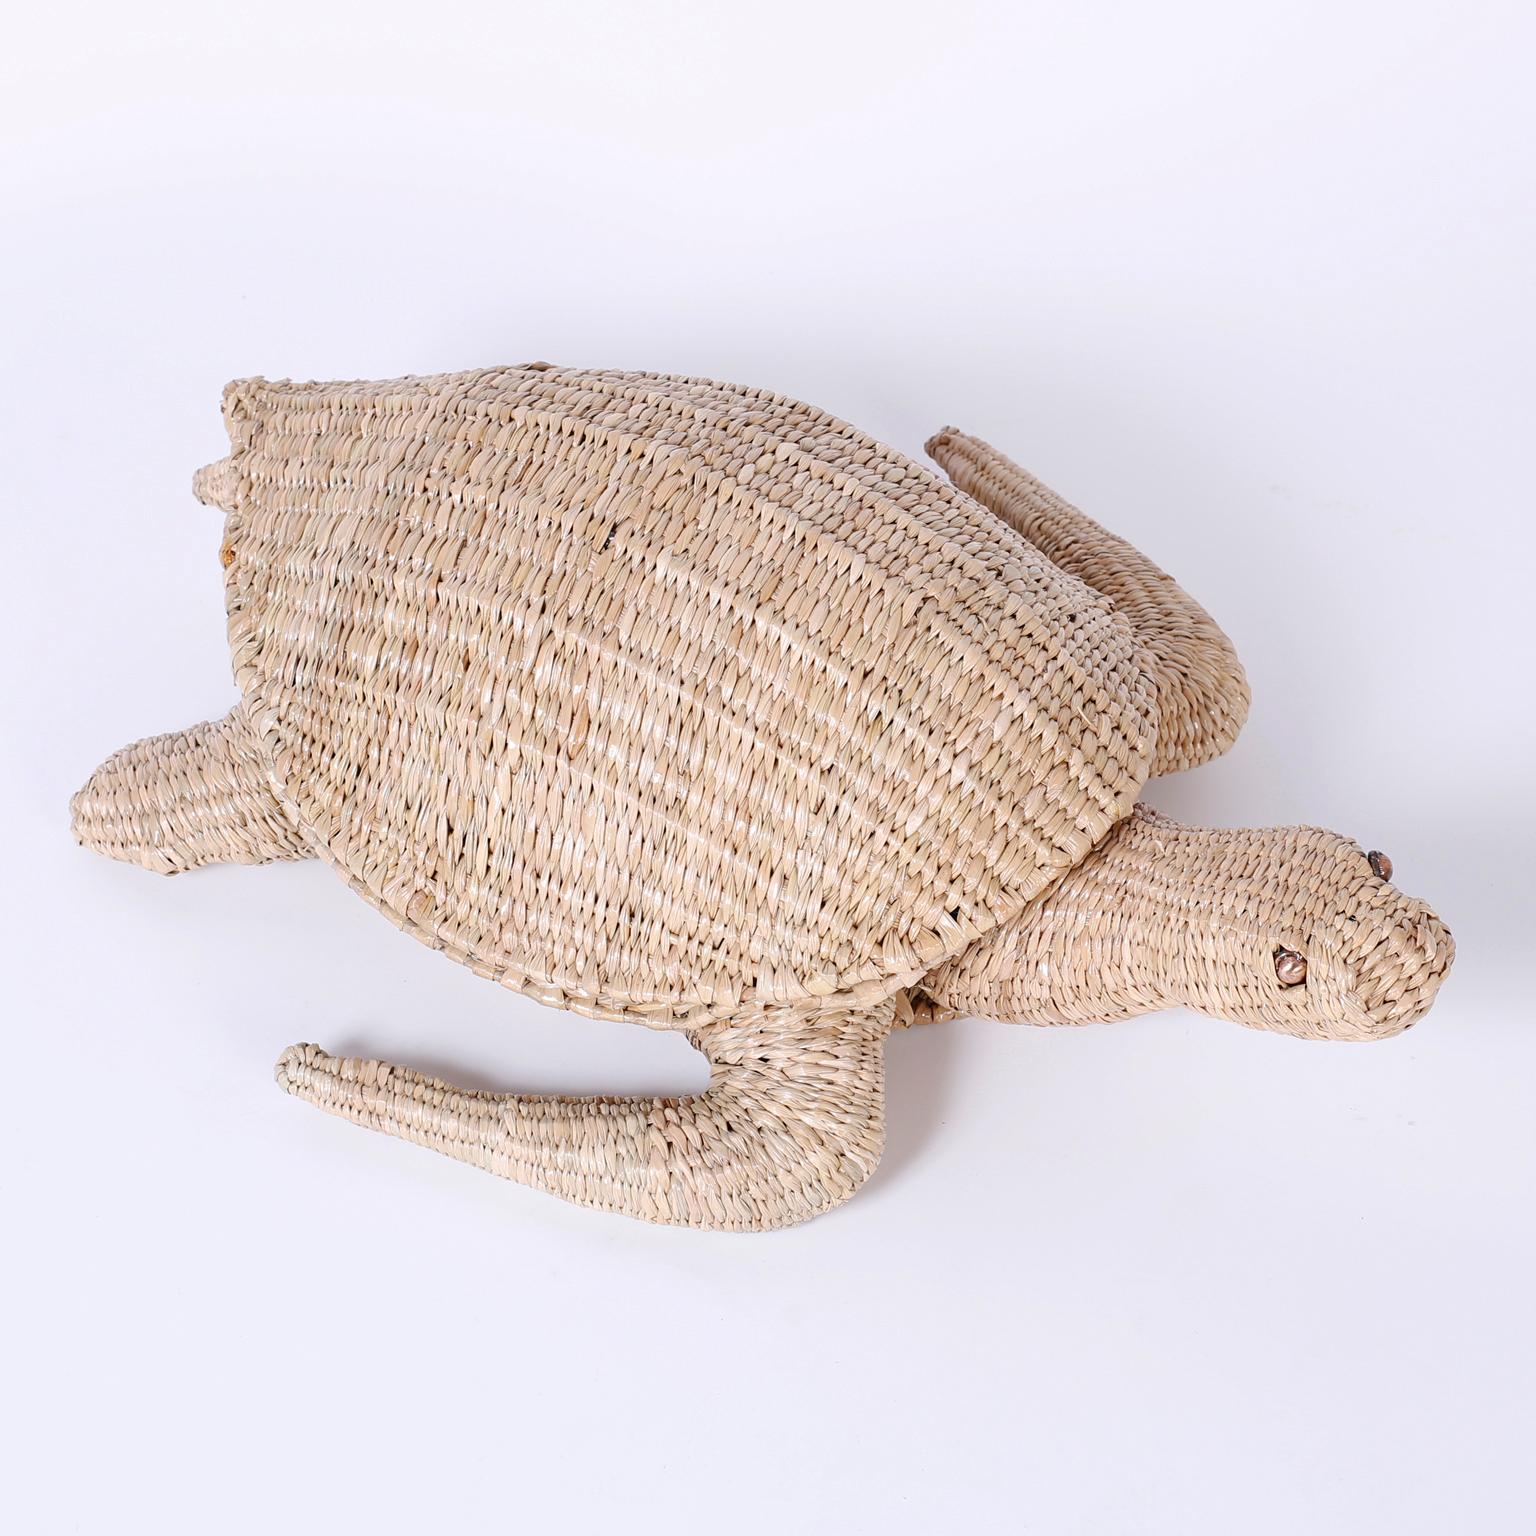 Amusing folky turtle sculpture or box crafted in wicker and ingeniously woven over a metal frame with a naive quality and a hinged shell for subtle secret storage. Signed Mario Torres on a brass medallion.